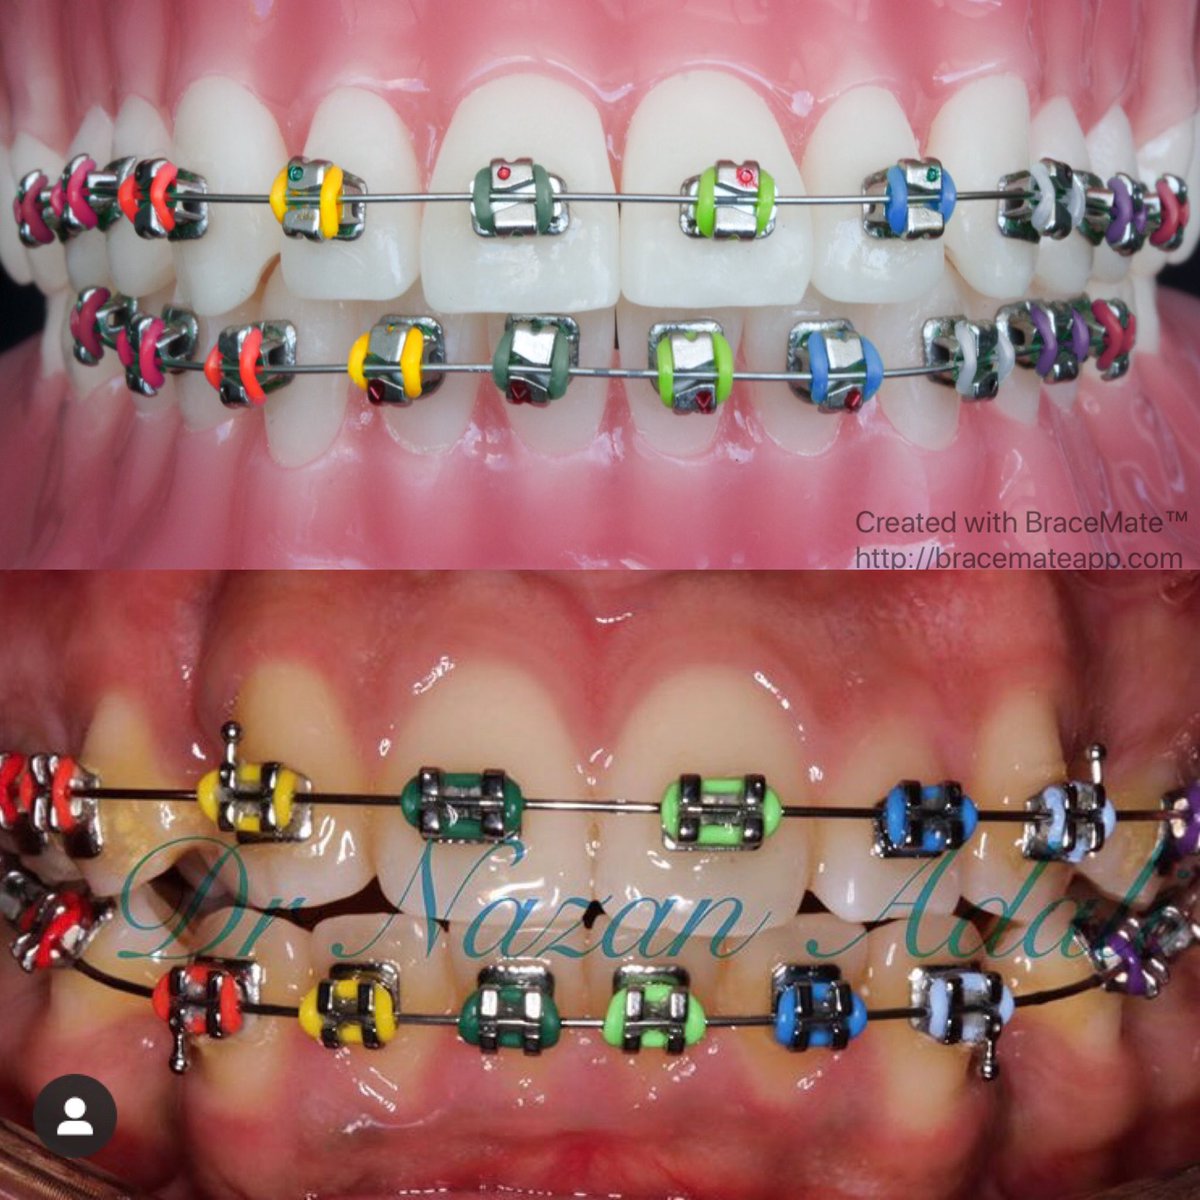 Check out the rainbow braces by Nazan Orthodontics l 
#braces #orthodontics #orthodontist #americanorthodontics #braceson #braceslife #colour #colours #london #specialistorthodontist #ortho